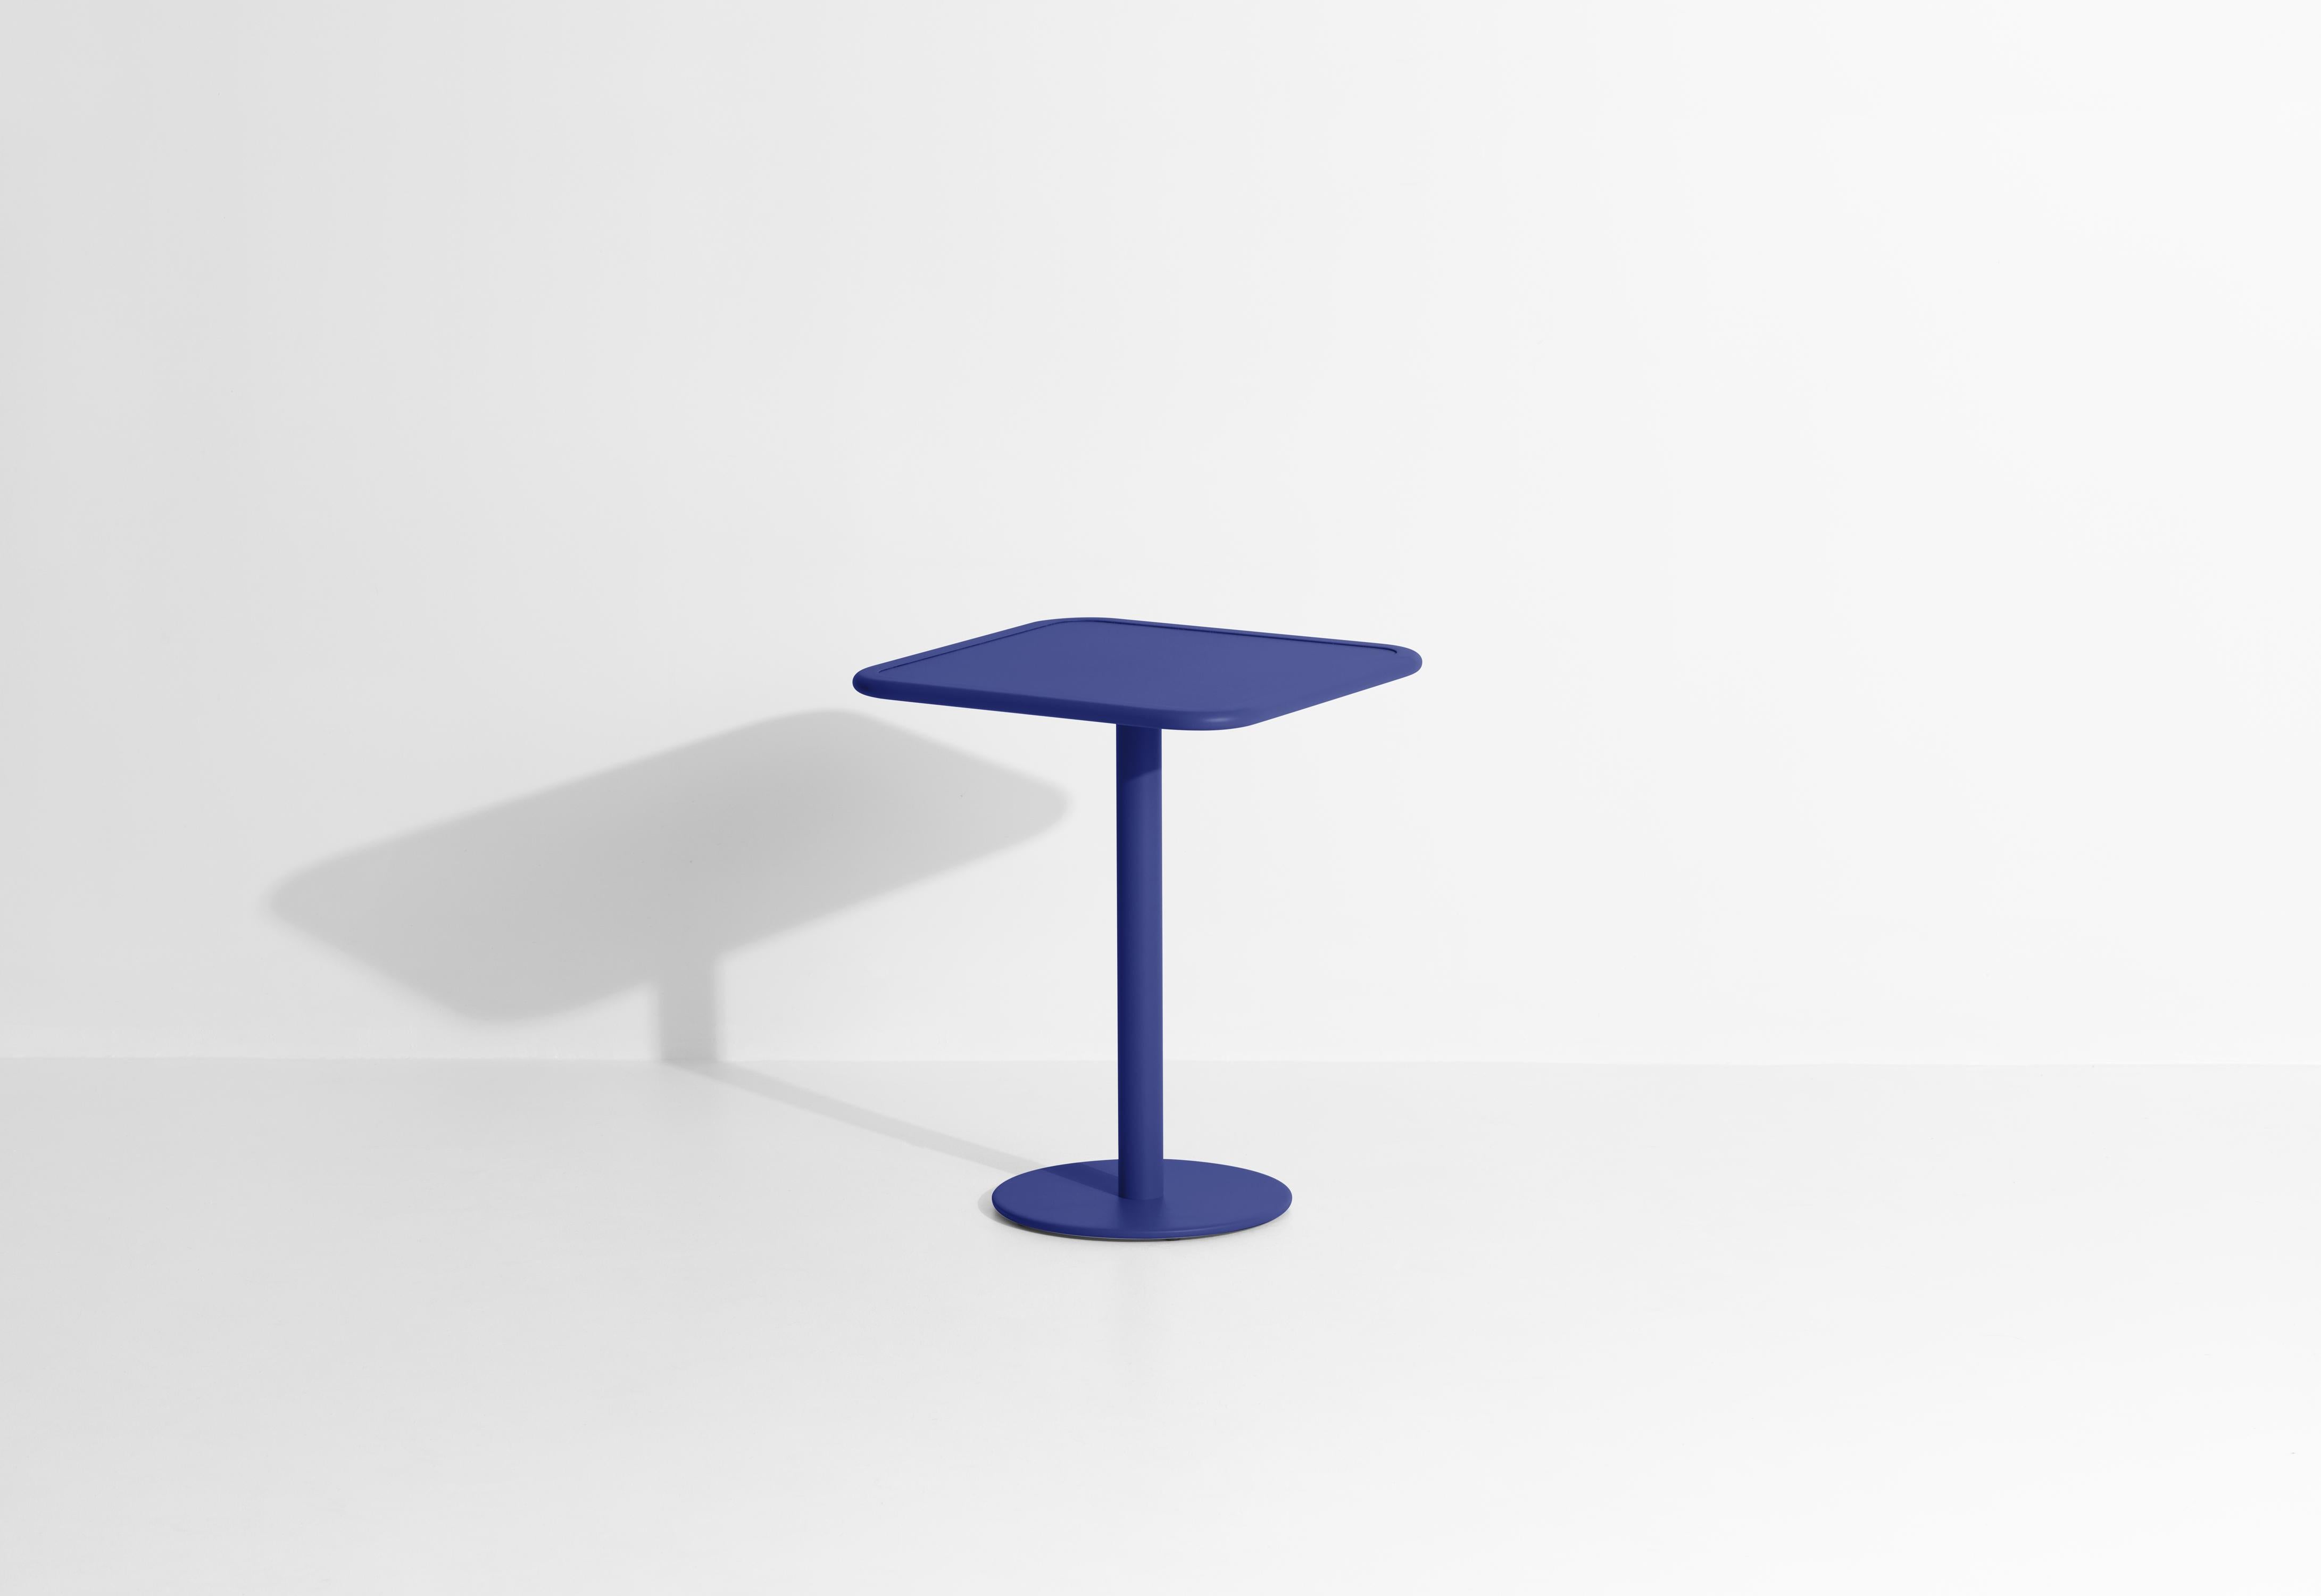 Chinese Petite Friture Week-End Bistro Square Dining Table in Blue Aluminium, 2017 For Sale